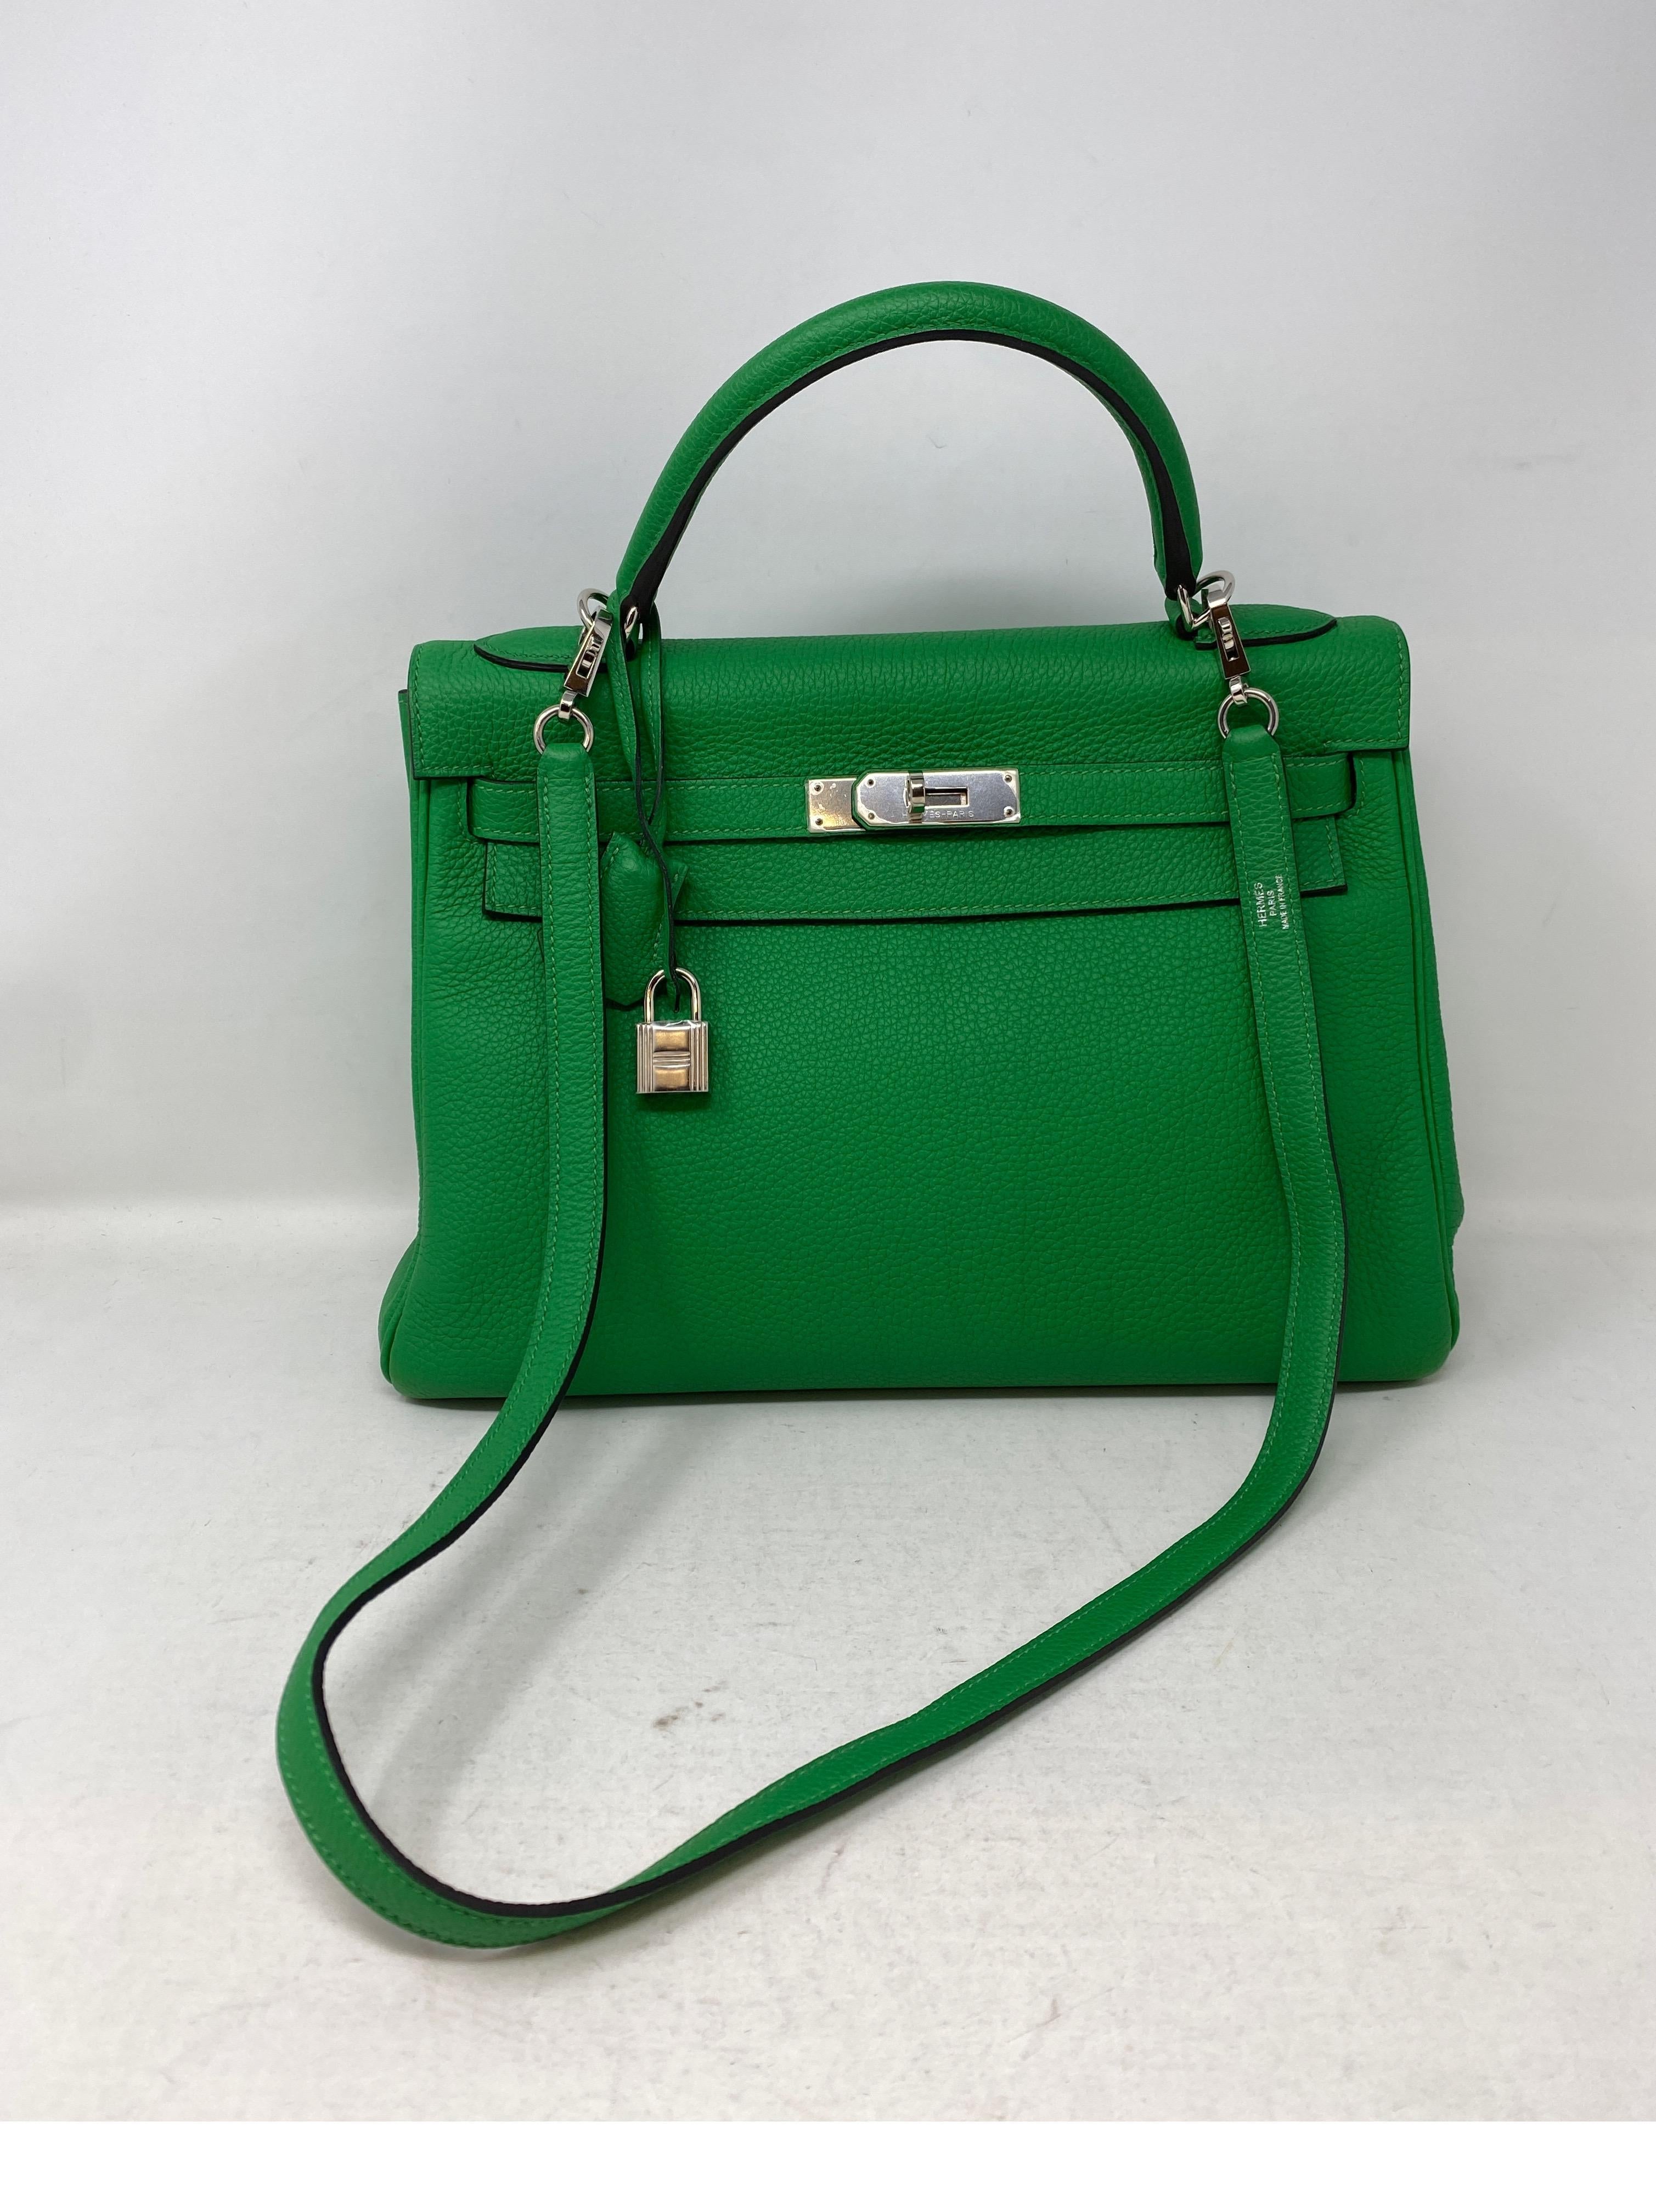 Hermes Bamboo Kelly 35 Bag. Striking green bamboo color with palladium hardware. Good condition. Includes clochette, lock, keys, and dust cover. Guaranteed authentic. 